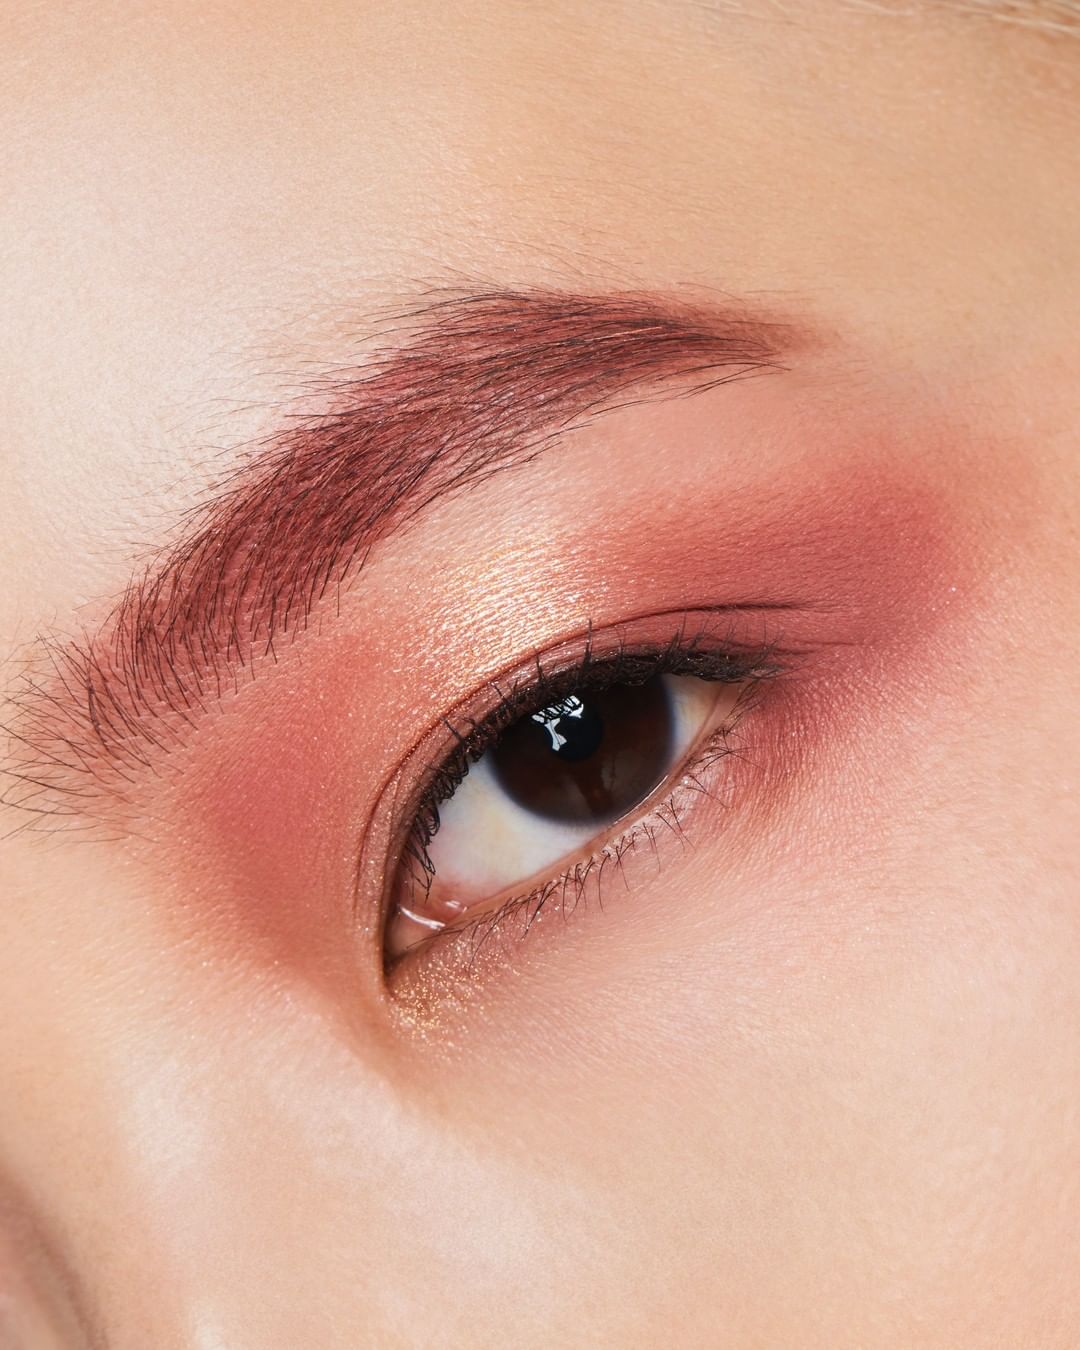 shu uemura - feel how easily you can blend and create a beautiful gradation on your eyes with the new color atelier eye shadow in M261. 🍂 #shuuemura #shuartistry #pressedeyeshadow